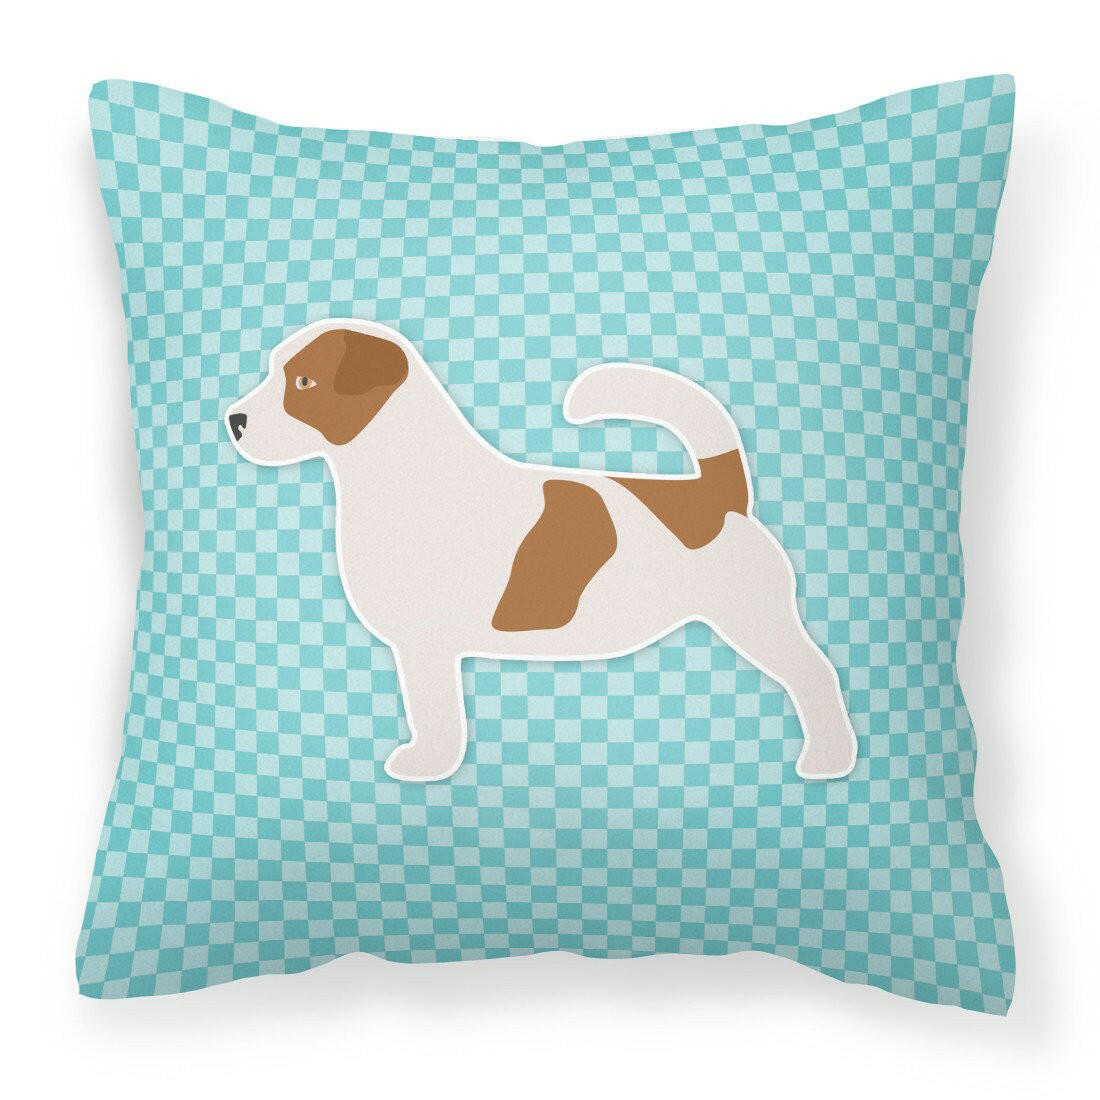 Jack Russell Terrier  Checkerboard Blue Fabric Decorative Pillow BB3707PW1818 by Caroline's Treasures